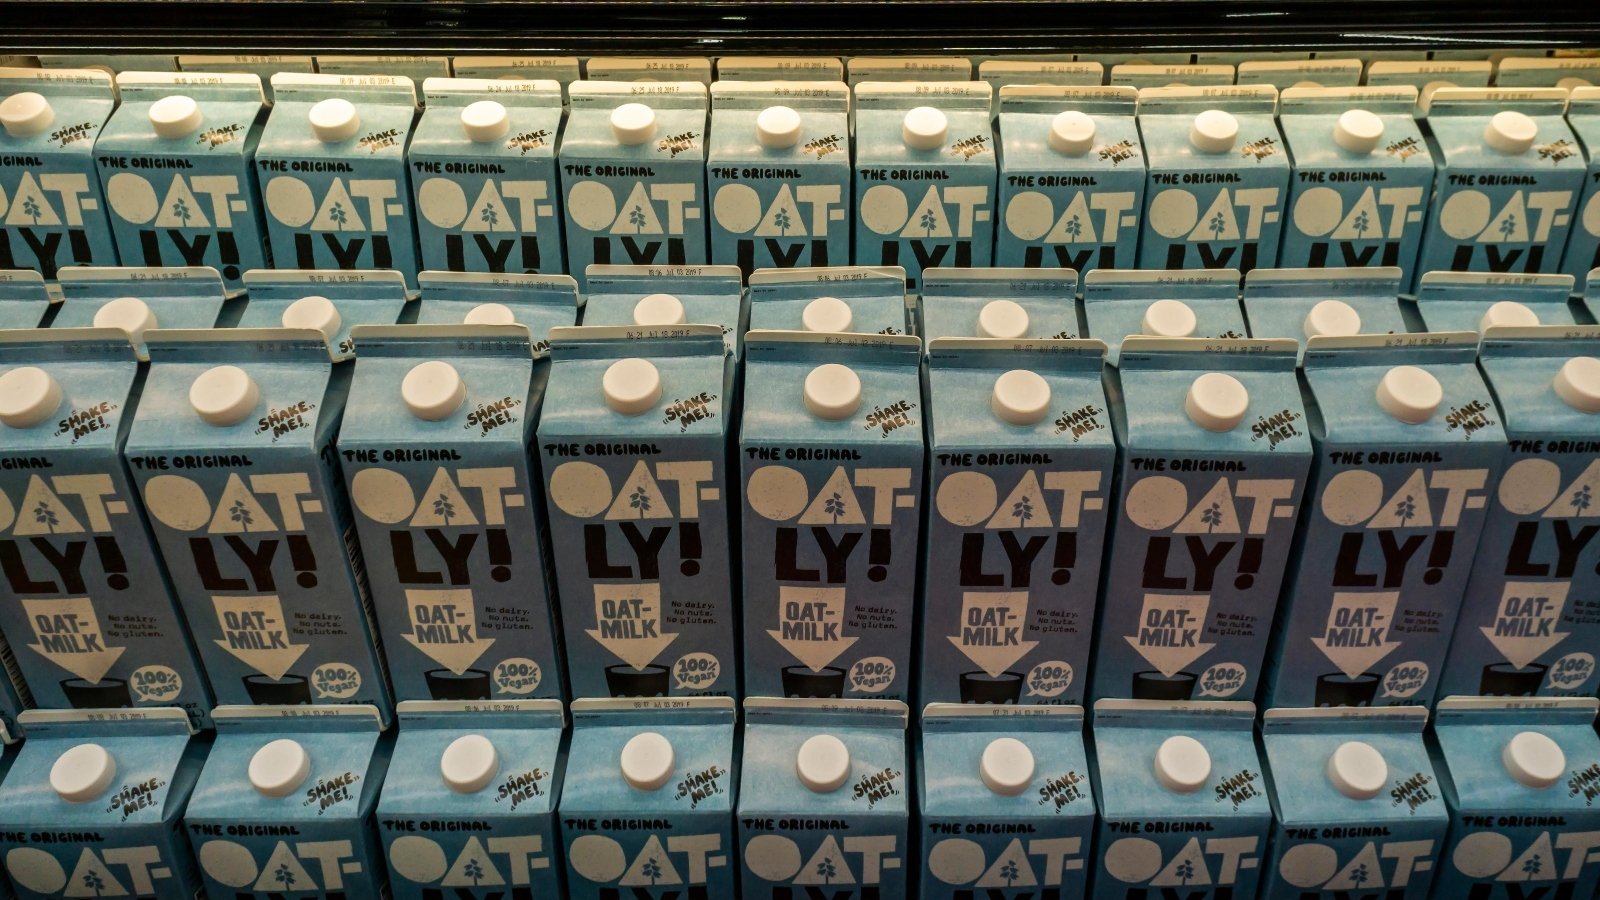 Oatly adverts under fire on 'misleading' claims